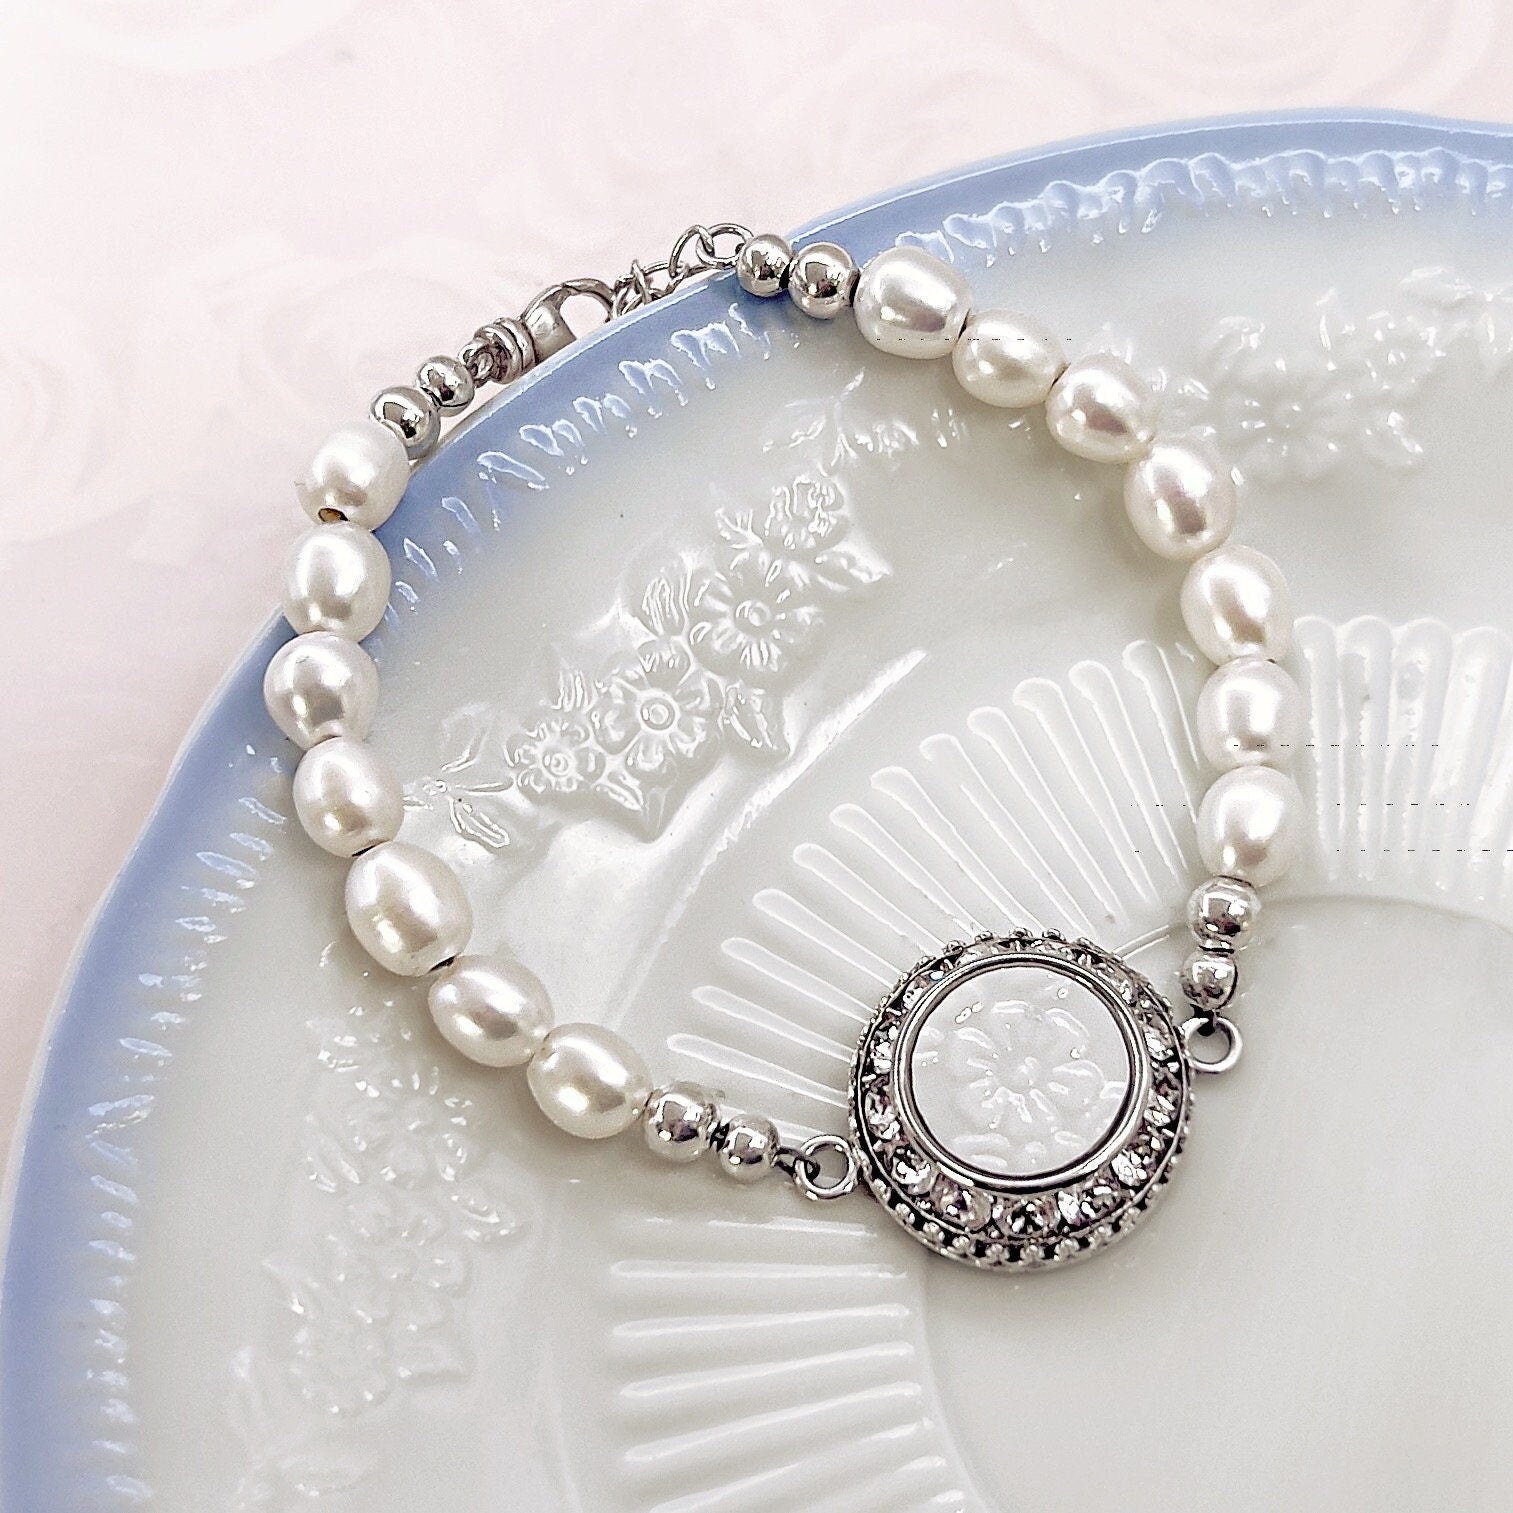 Alice Fire King Depression Glass, Freshwater Pearl Bracelet, Vintage Milk Glass, Unique Jewelry Gifts for Women, Gifts for Women